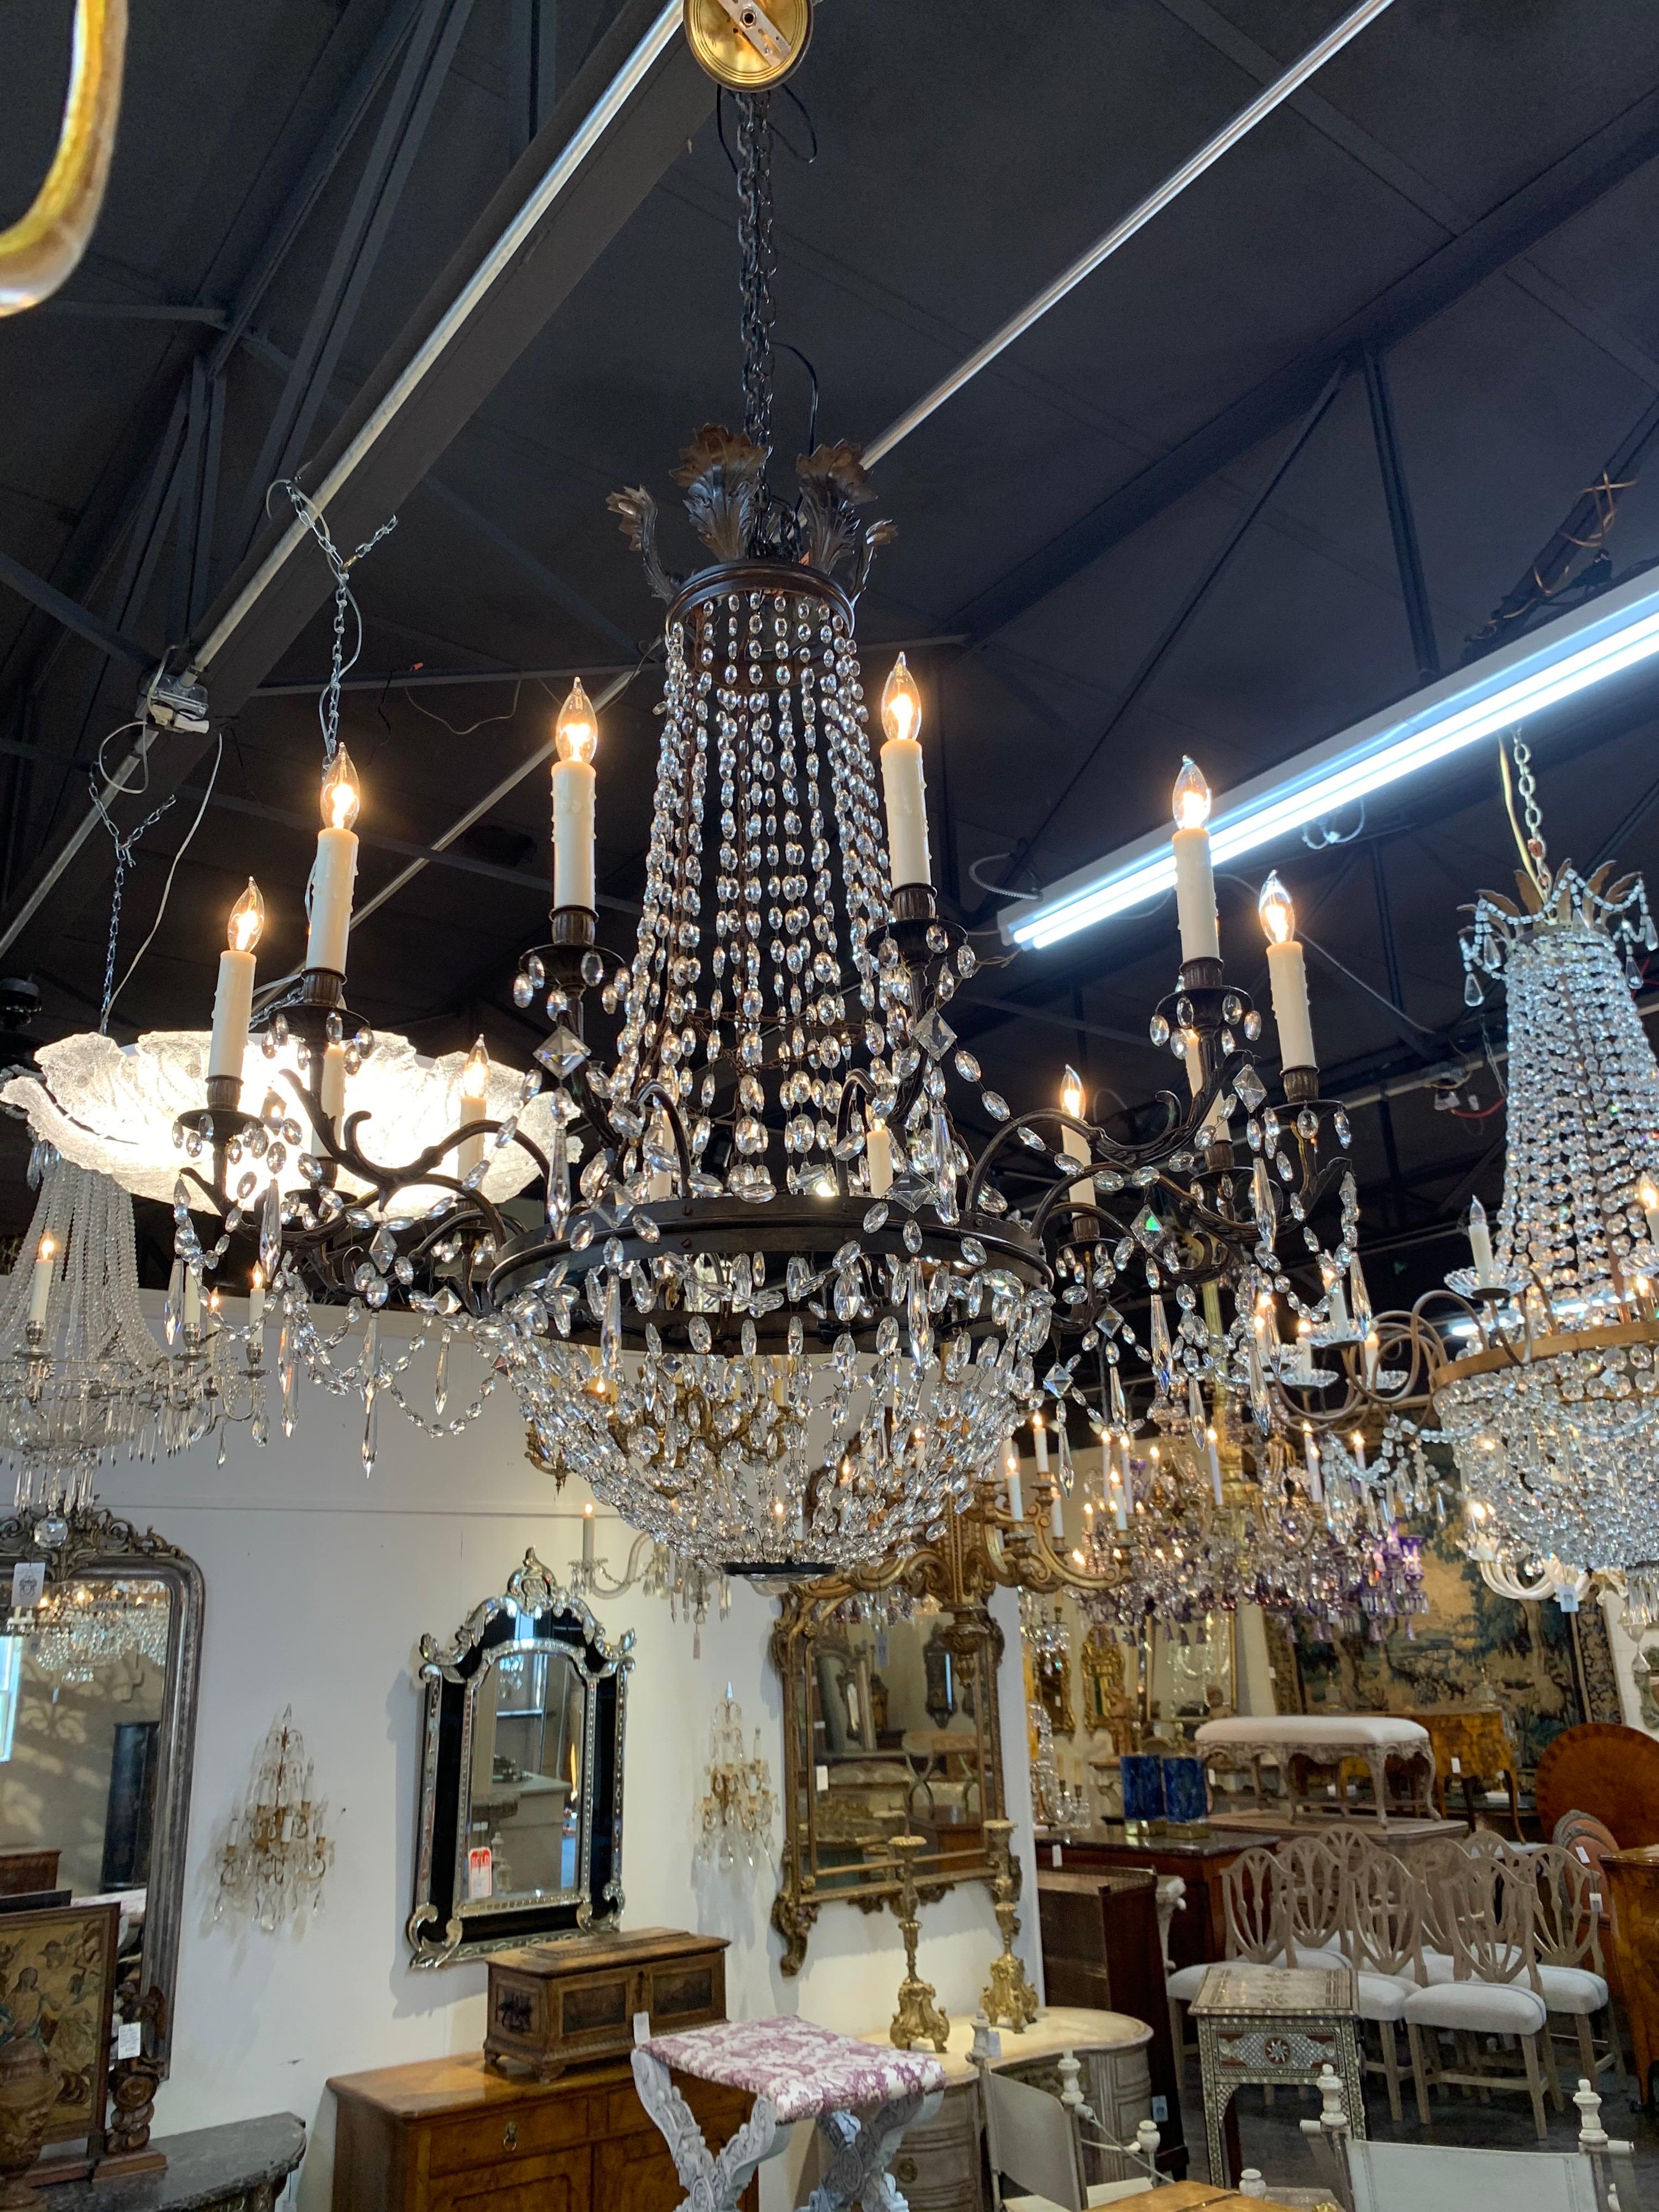 Fabulous 19th century Italian Empire style 12-light basket chandelier. The piece has beautiful glistening crystals and such an elegant look without being too formal. A true Classic!